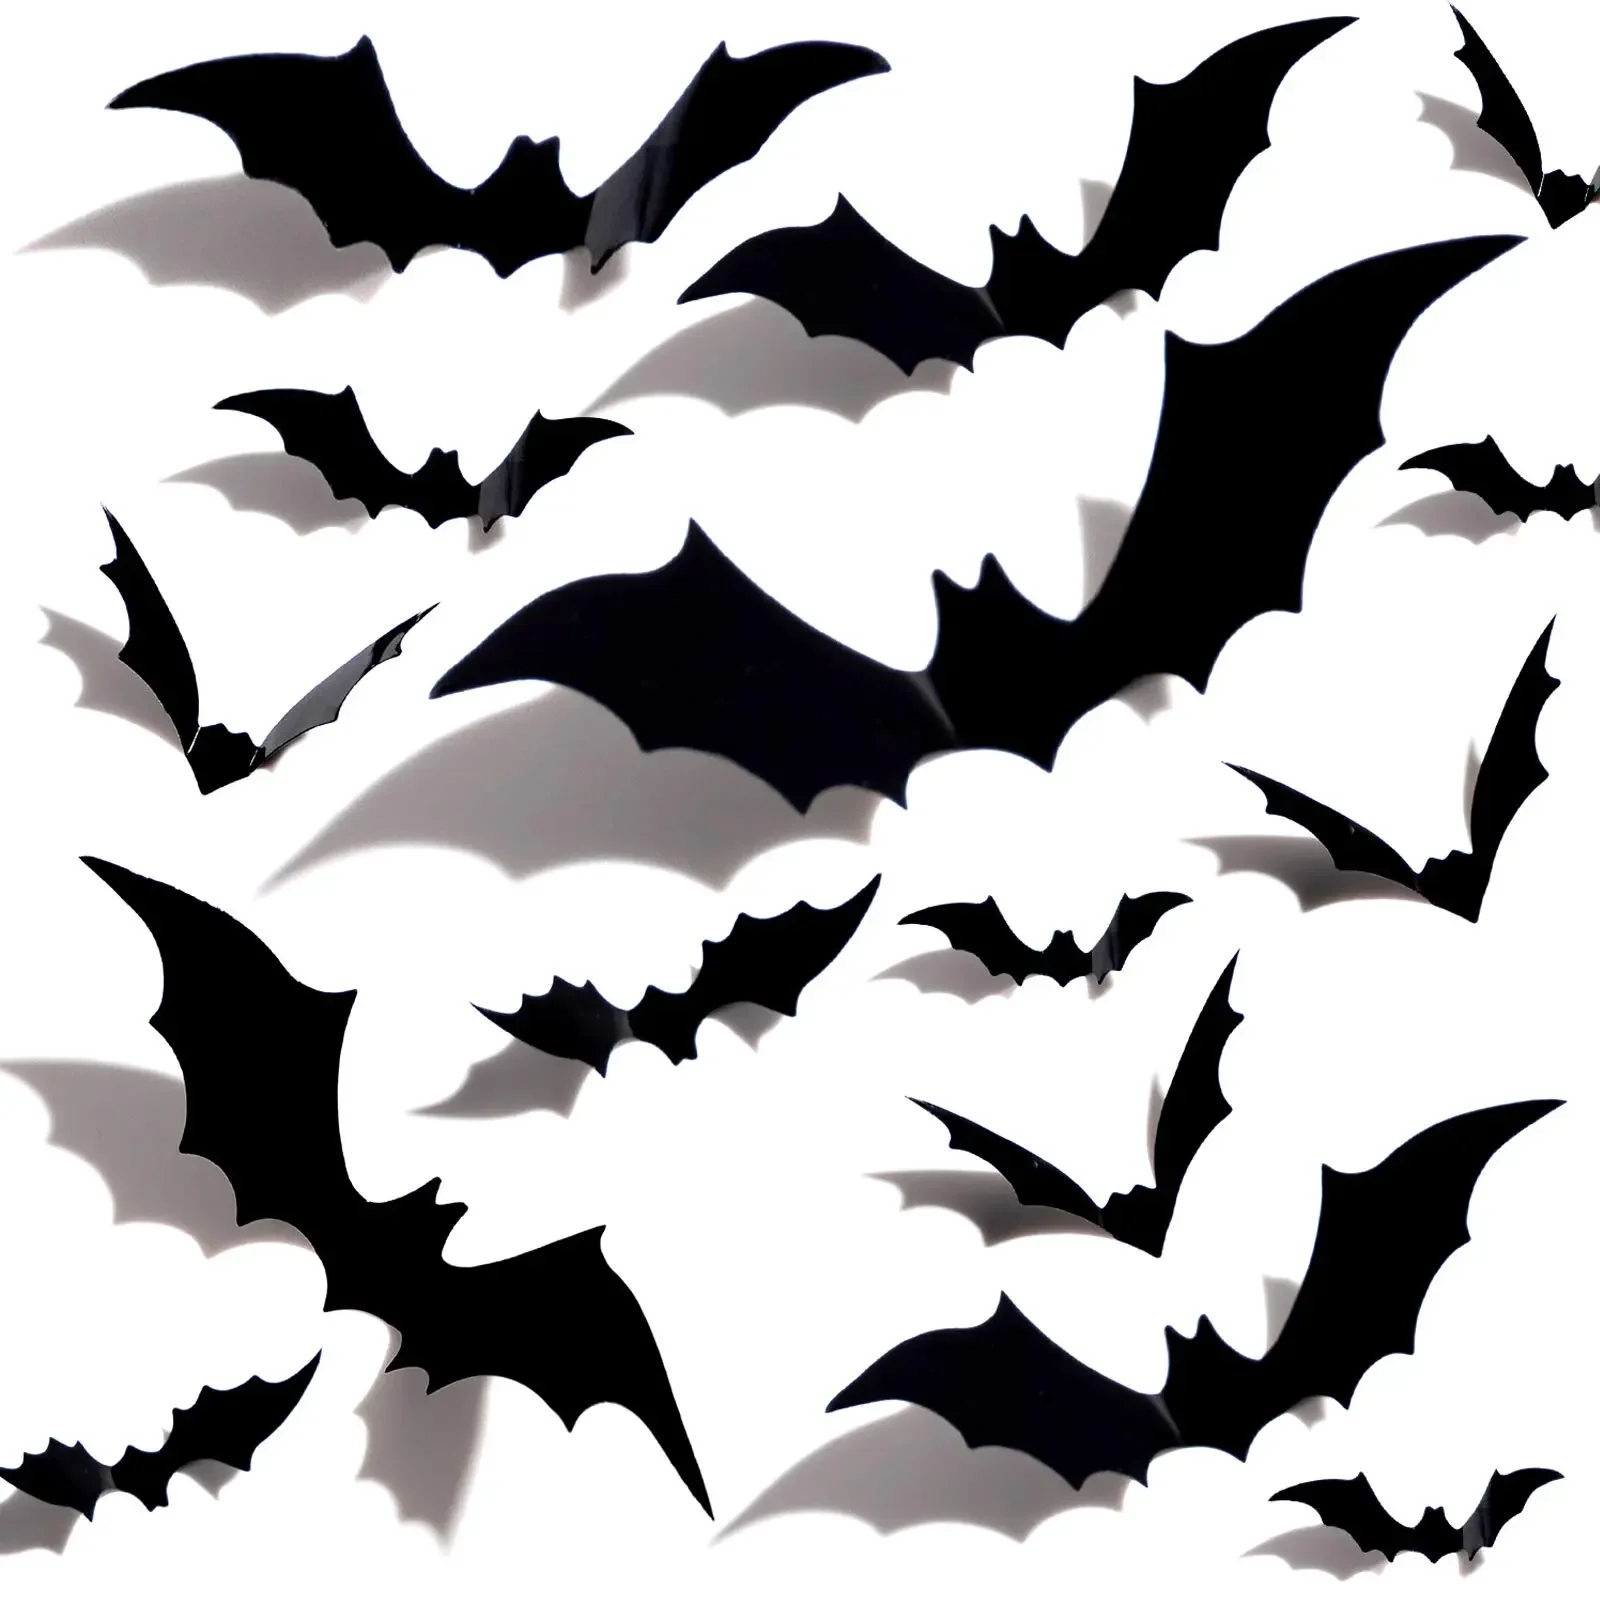 

Halloween 3D Bats Decoration Plastic Bat Wall Stickers for Home Window Decor Yard Sign Outdoor Lawn Spooky Party Supplies